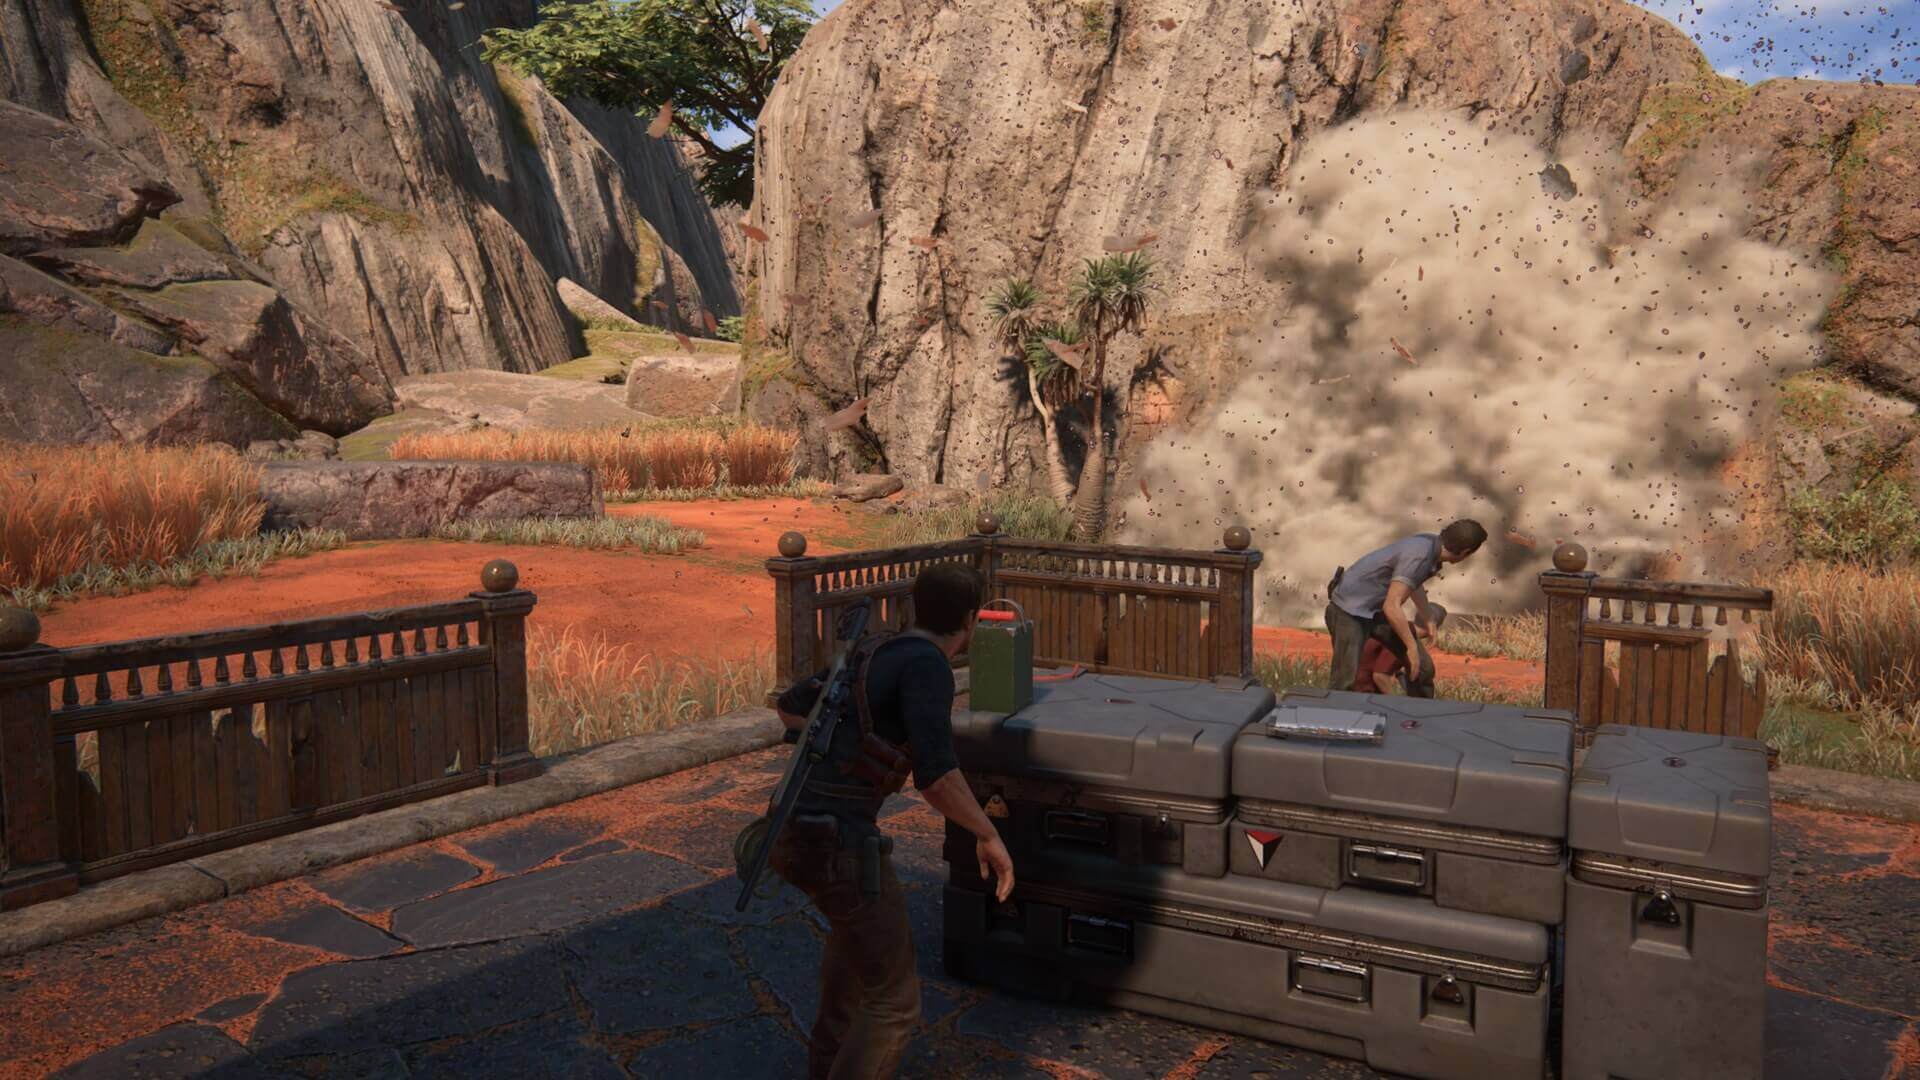 Uncharted 4, Uncharted Legacy of Thieves, Uncharted, Naughty Dog, Sony, Playstation, PS5